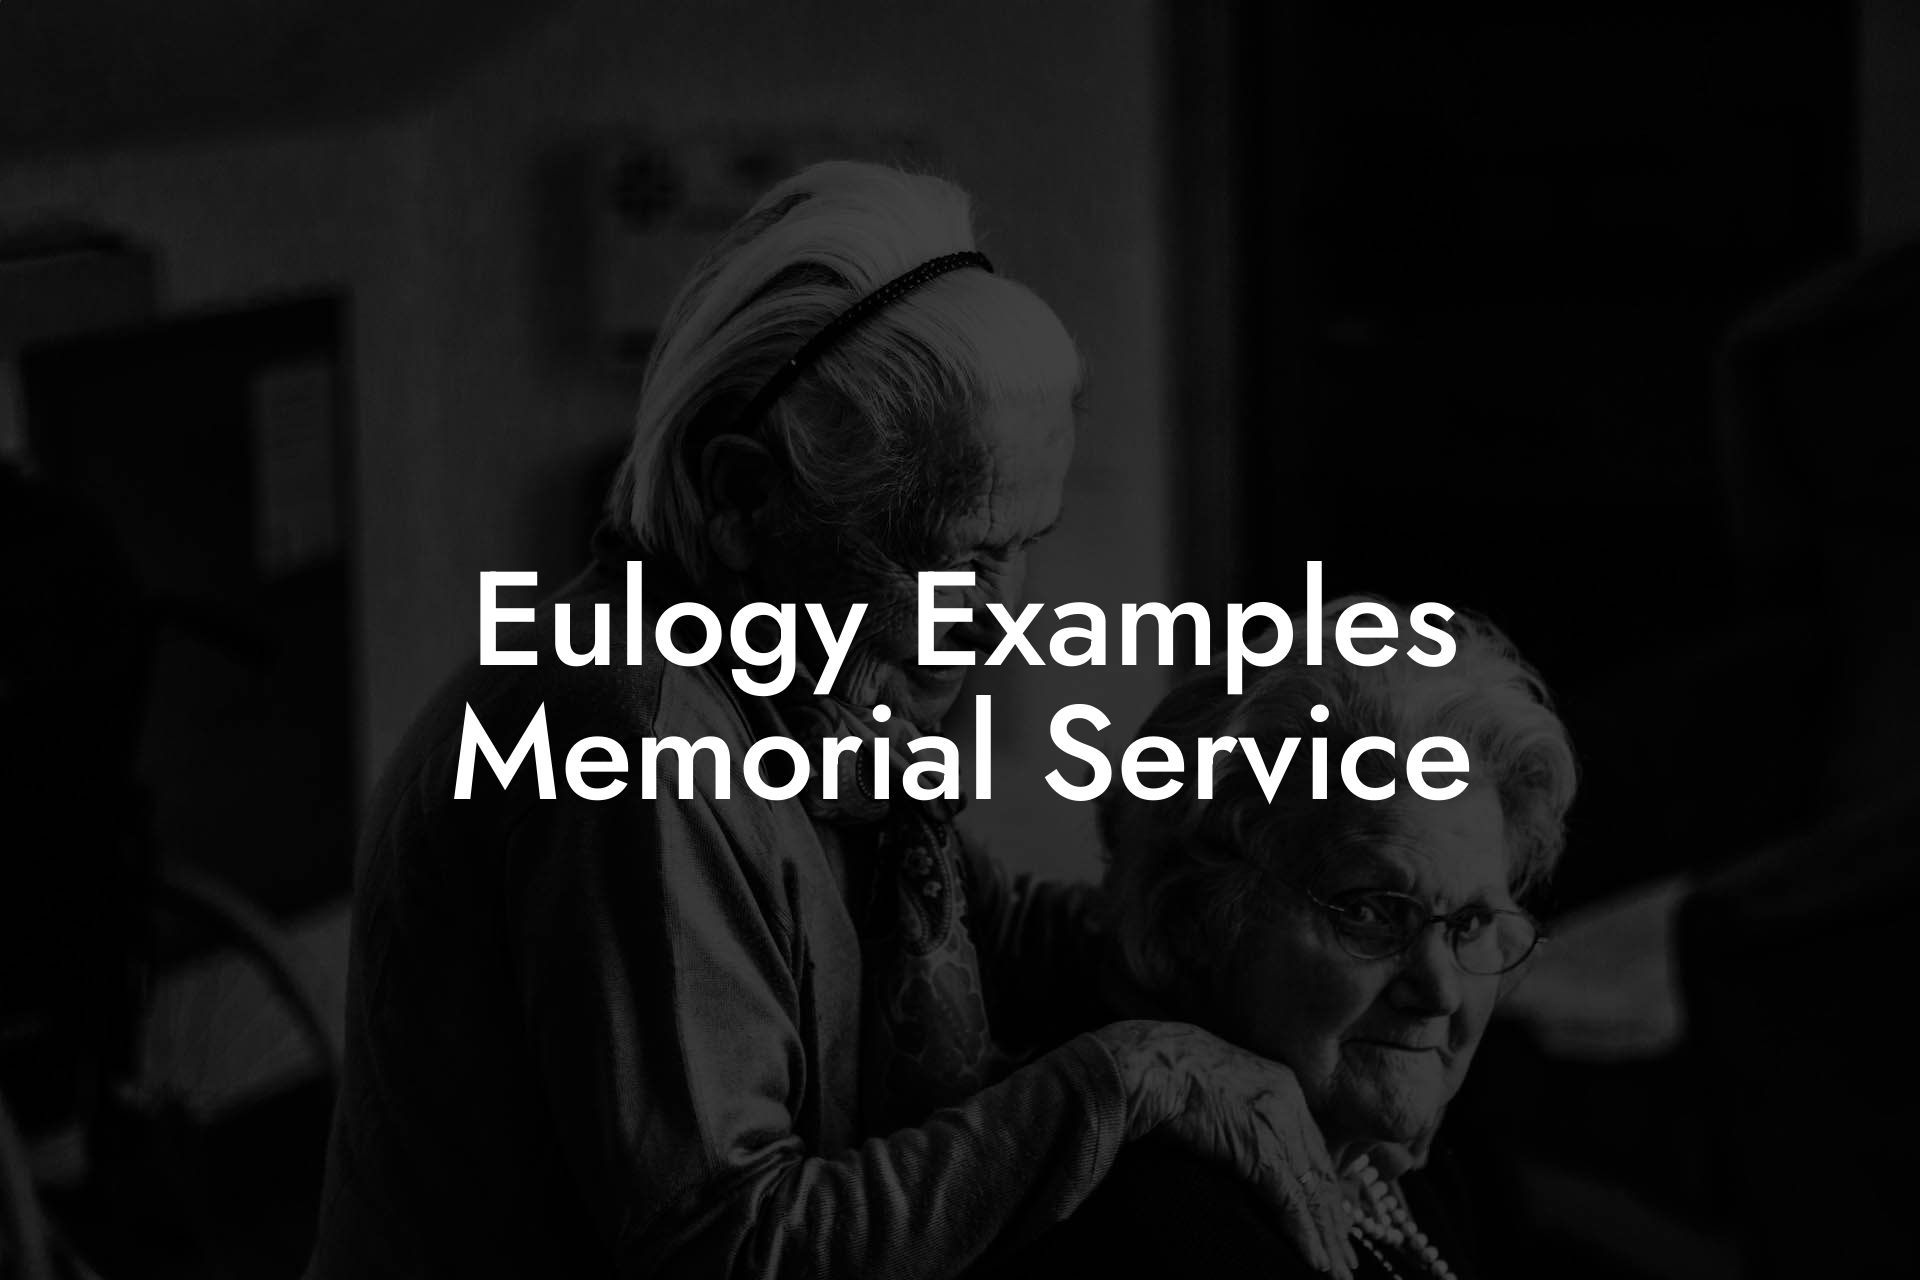 Eulogy Examples Memorial Service